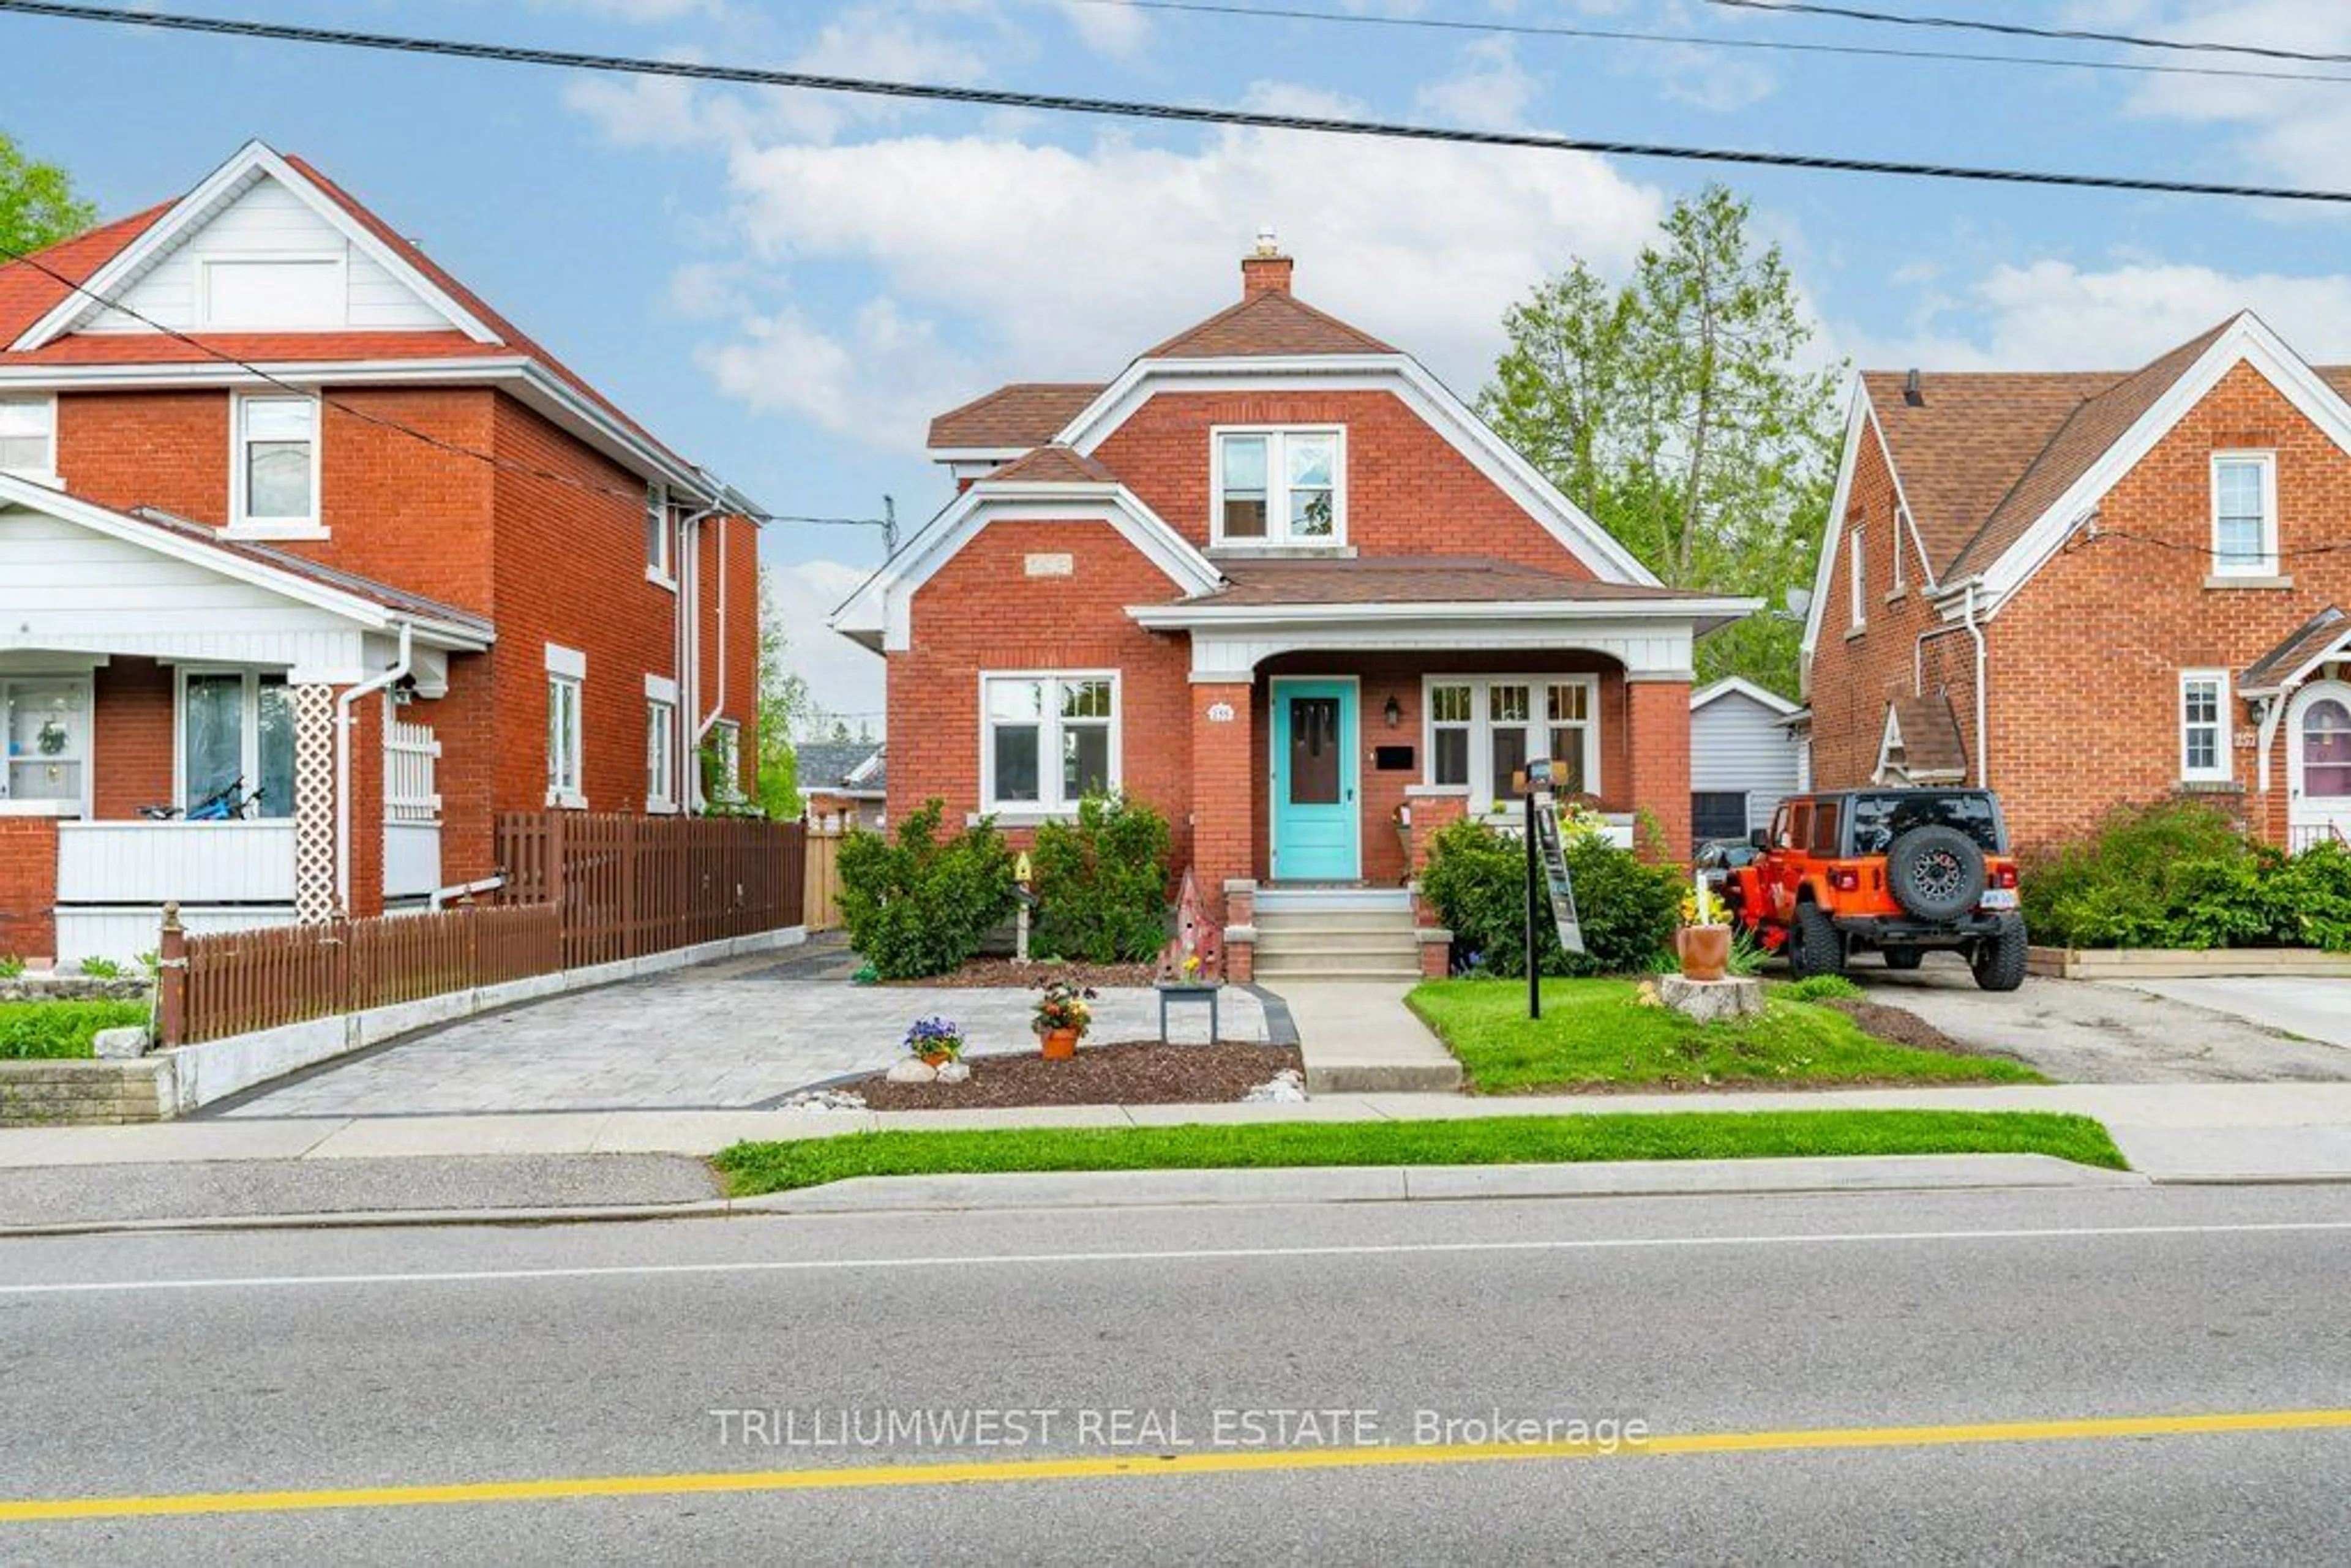 Home with brick exterior material for 255 Margaret Ave, Waterloo Ontario N2H 4J6